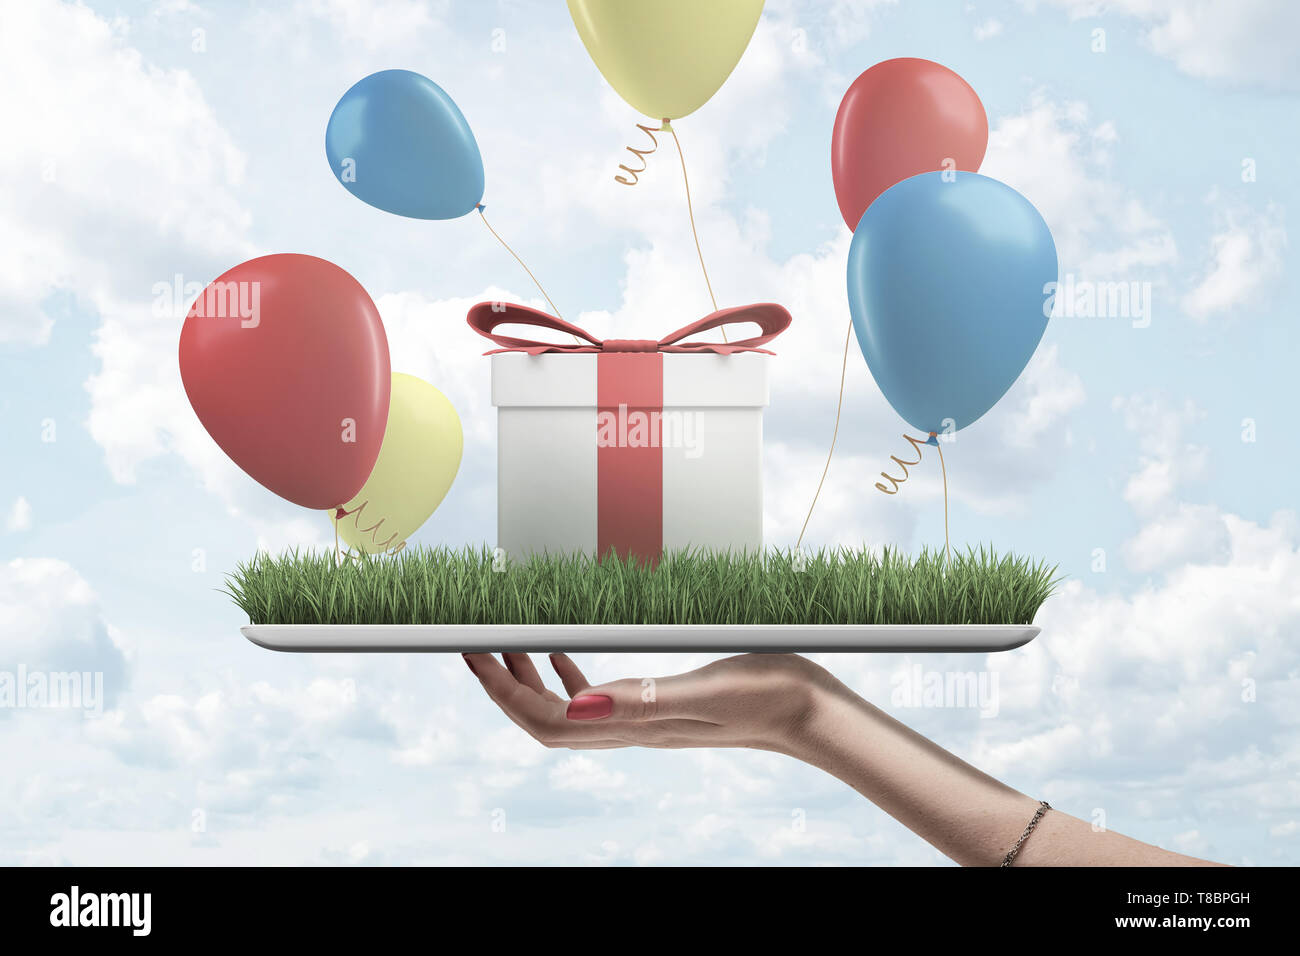 Side view of woman's hand holding digital tablet with green grass on screen, gift box standing on top and colorful balloons flying around. Stock Photo